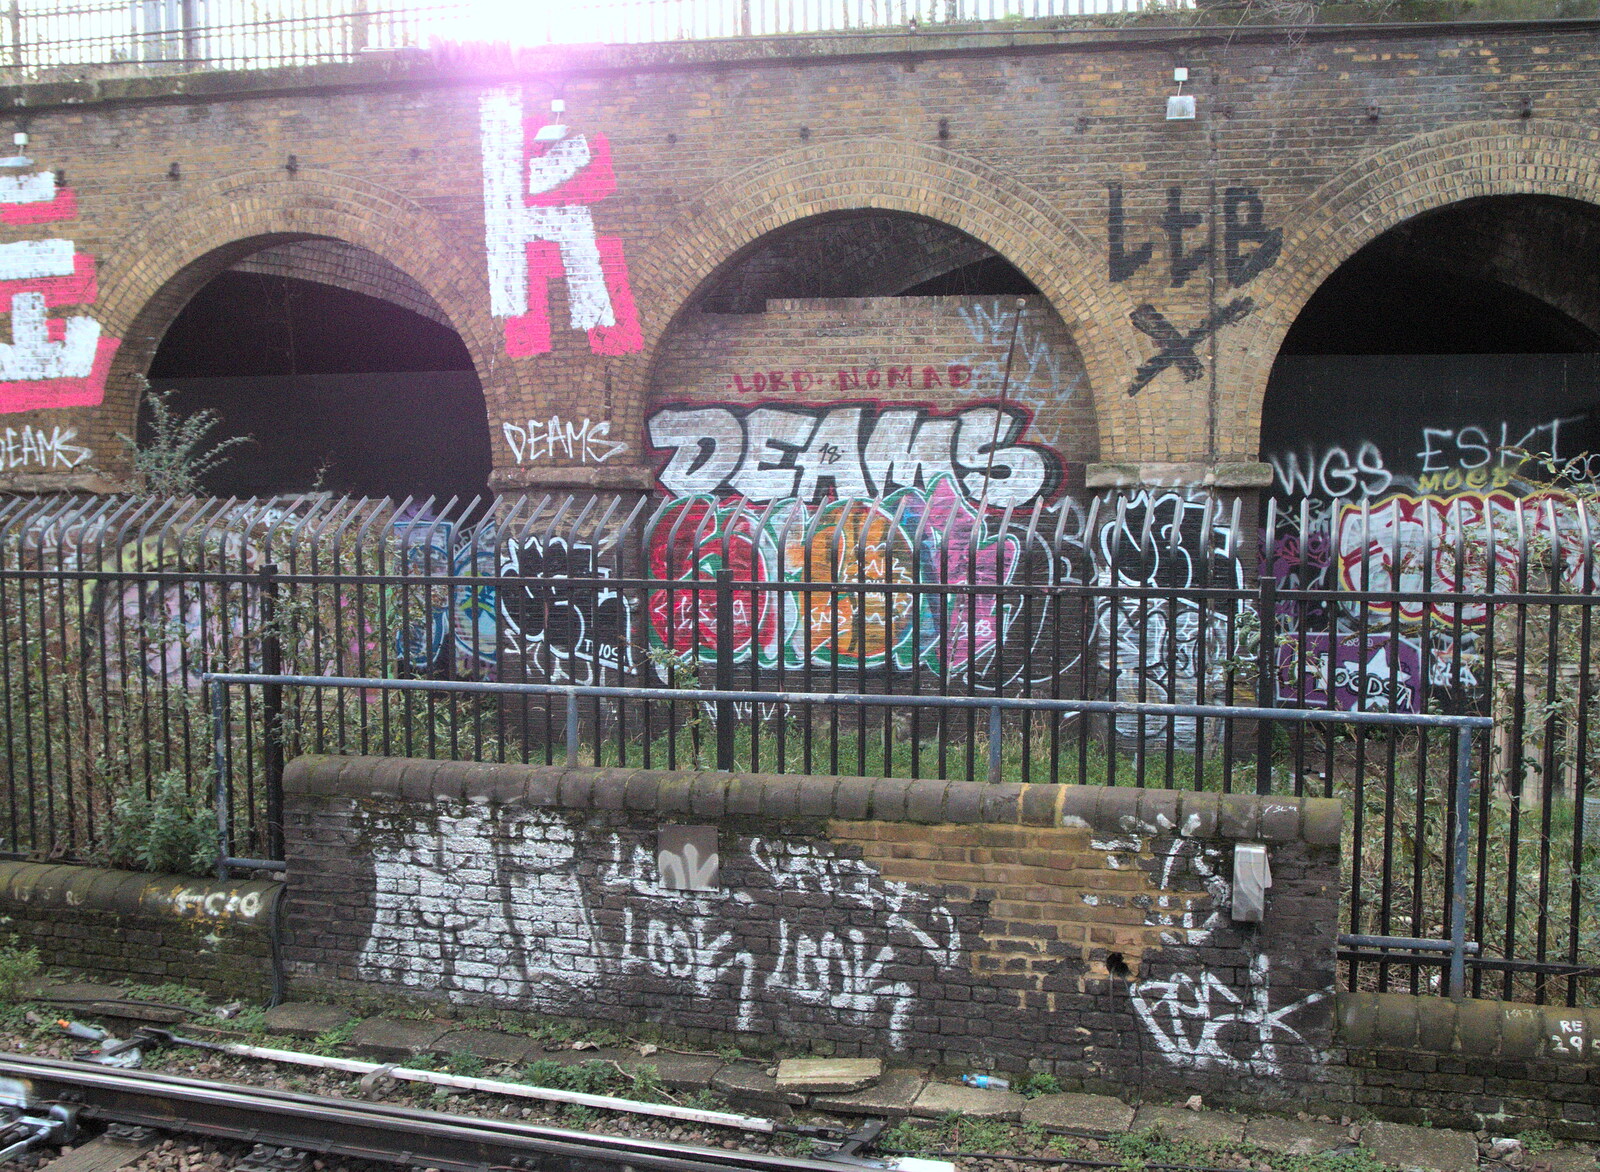 Lord Nomad and Deams tags are getting crowded out from Railway Graffiti, Tower Hamlets, London - 12th February 2019